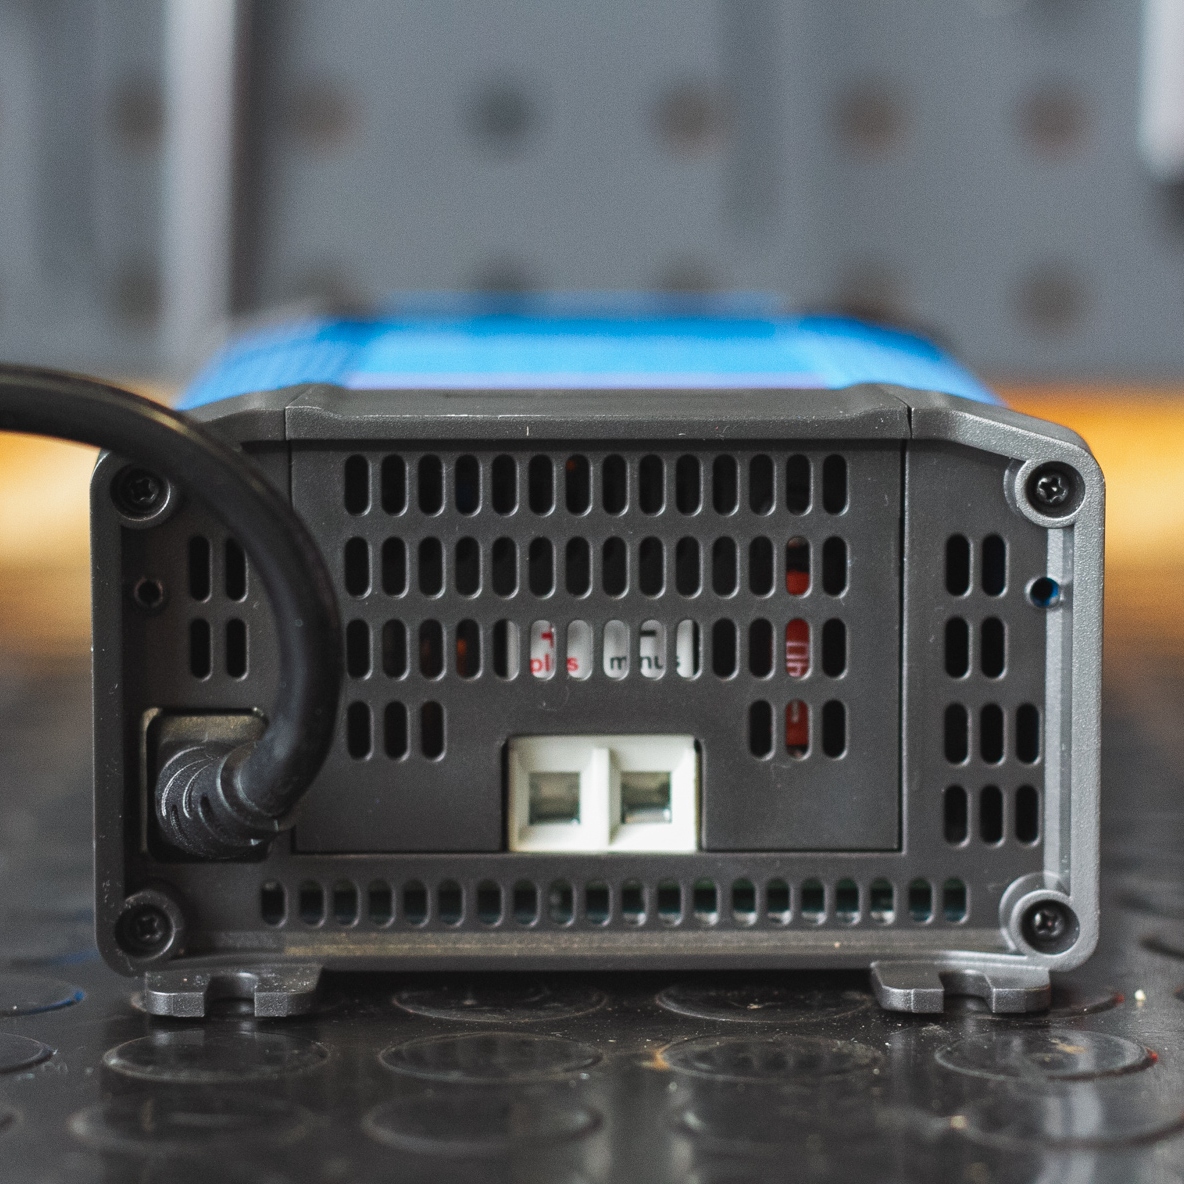 A close-up of a black electronic device, possibly the Victron Battery Charger 12/30 - Indoor (IP22) Blue Smart - 1 Output, with a vented rear panel and connected cables on a black mat.